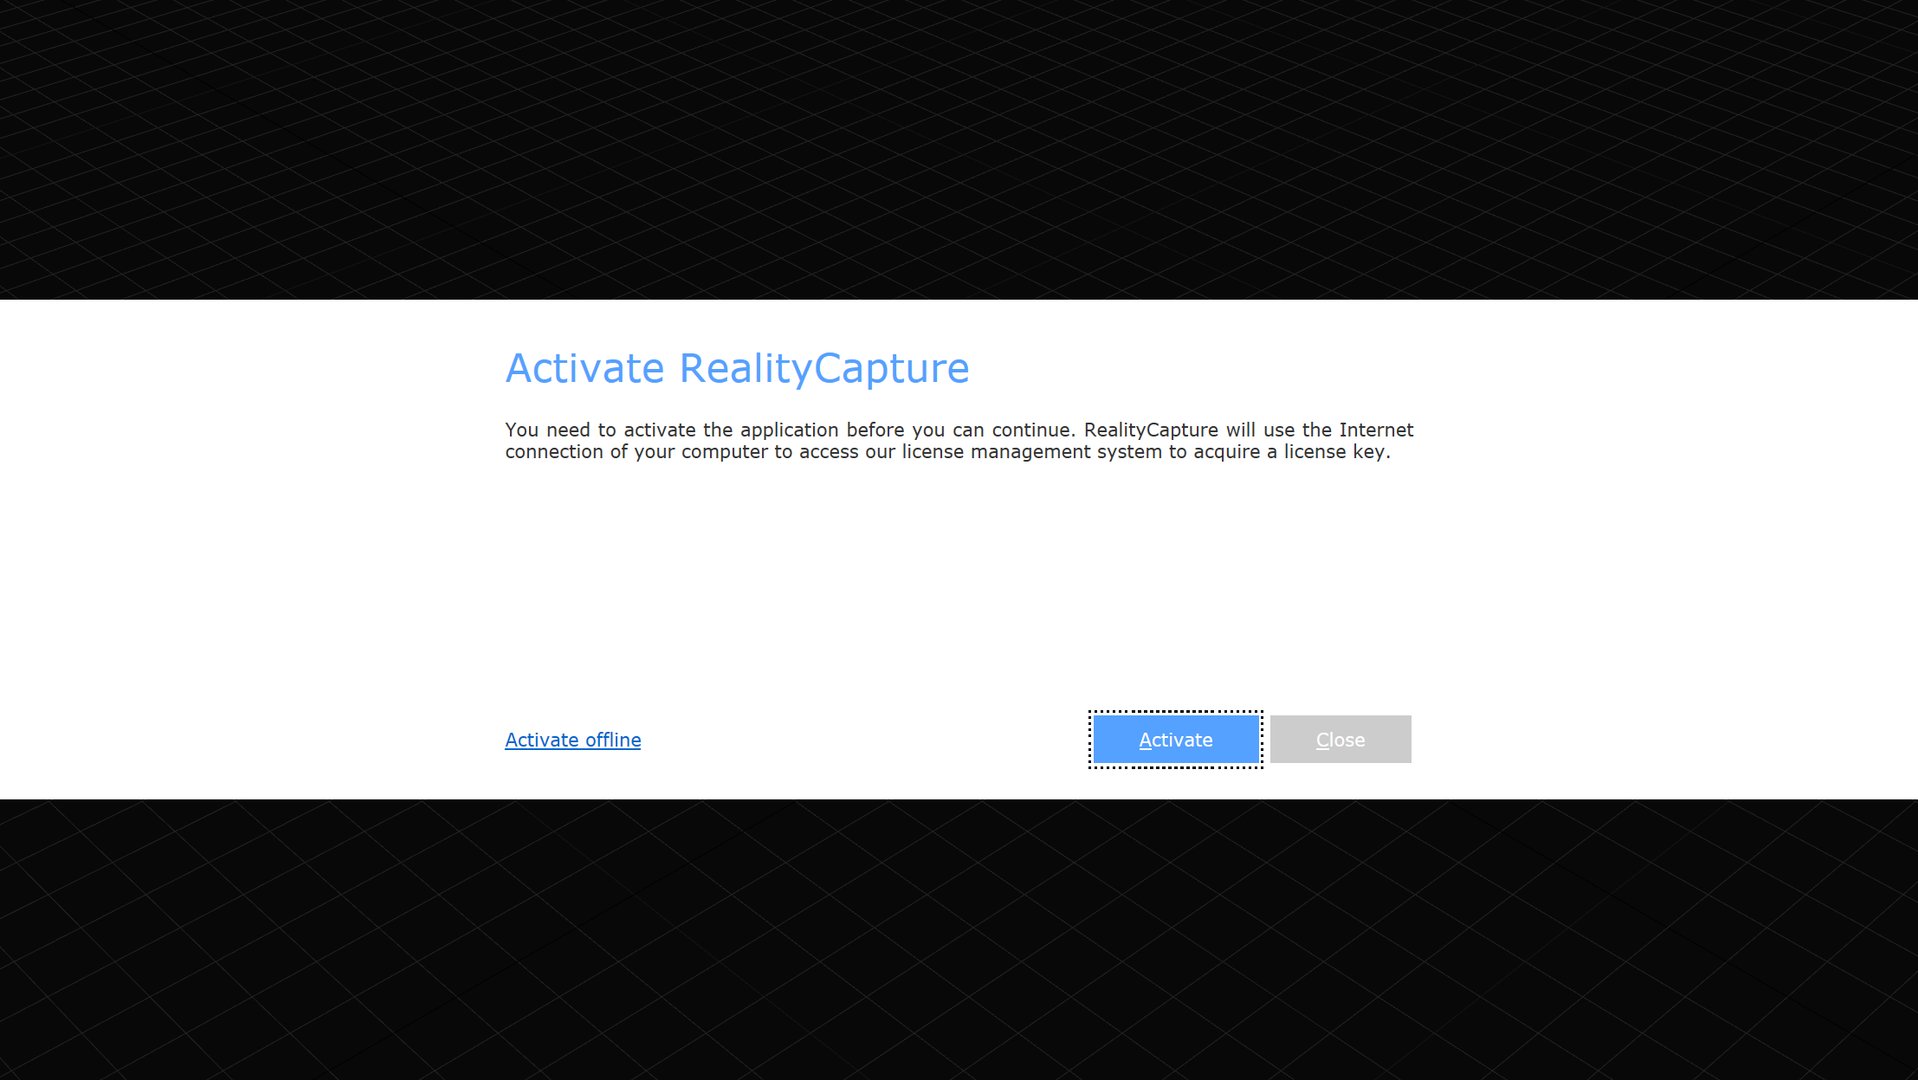 Failed Epicgames login with RealityCapture - International - Epic